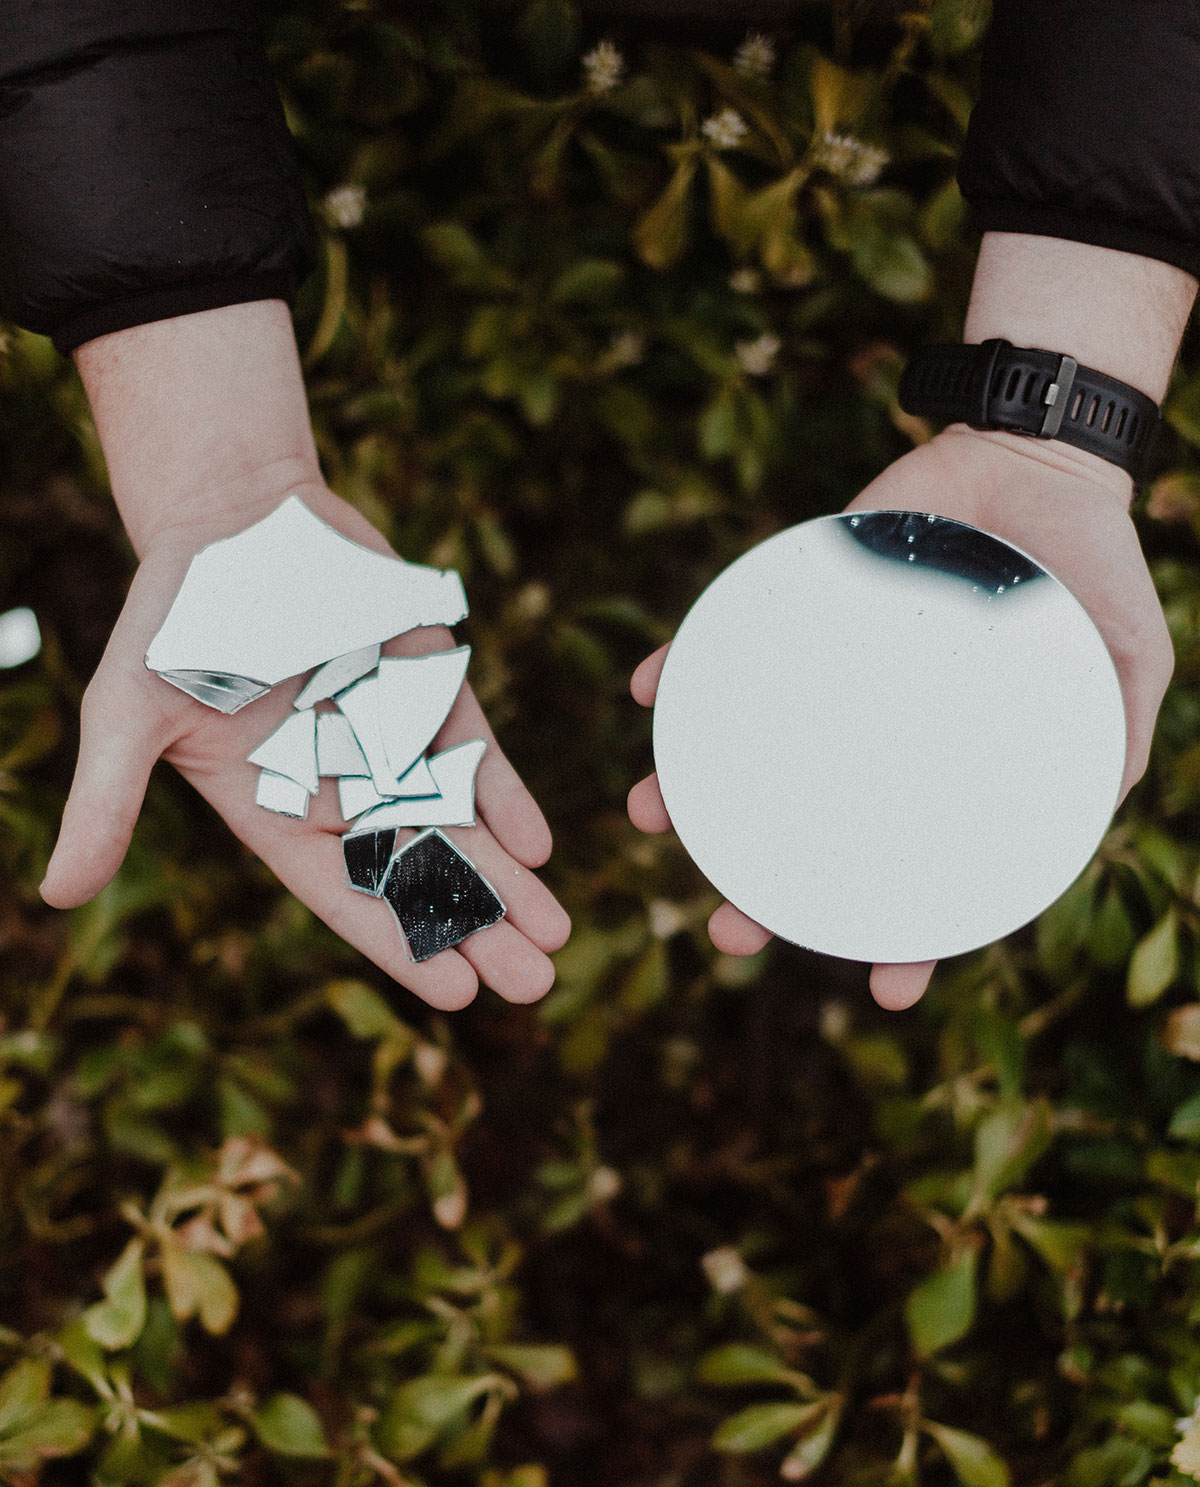 holding shattered mirror and intact mirror